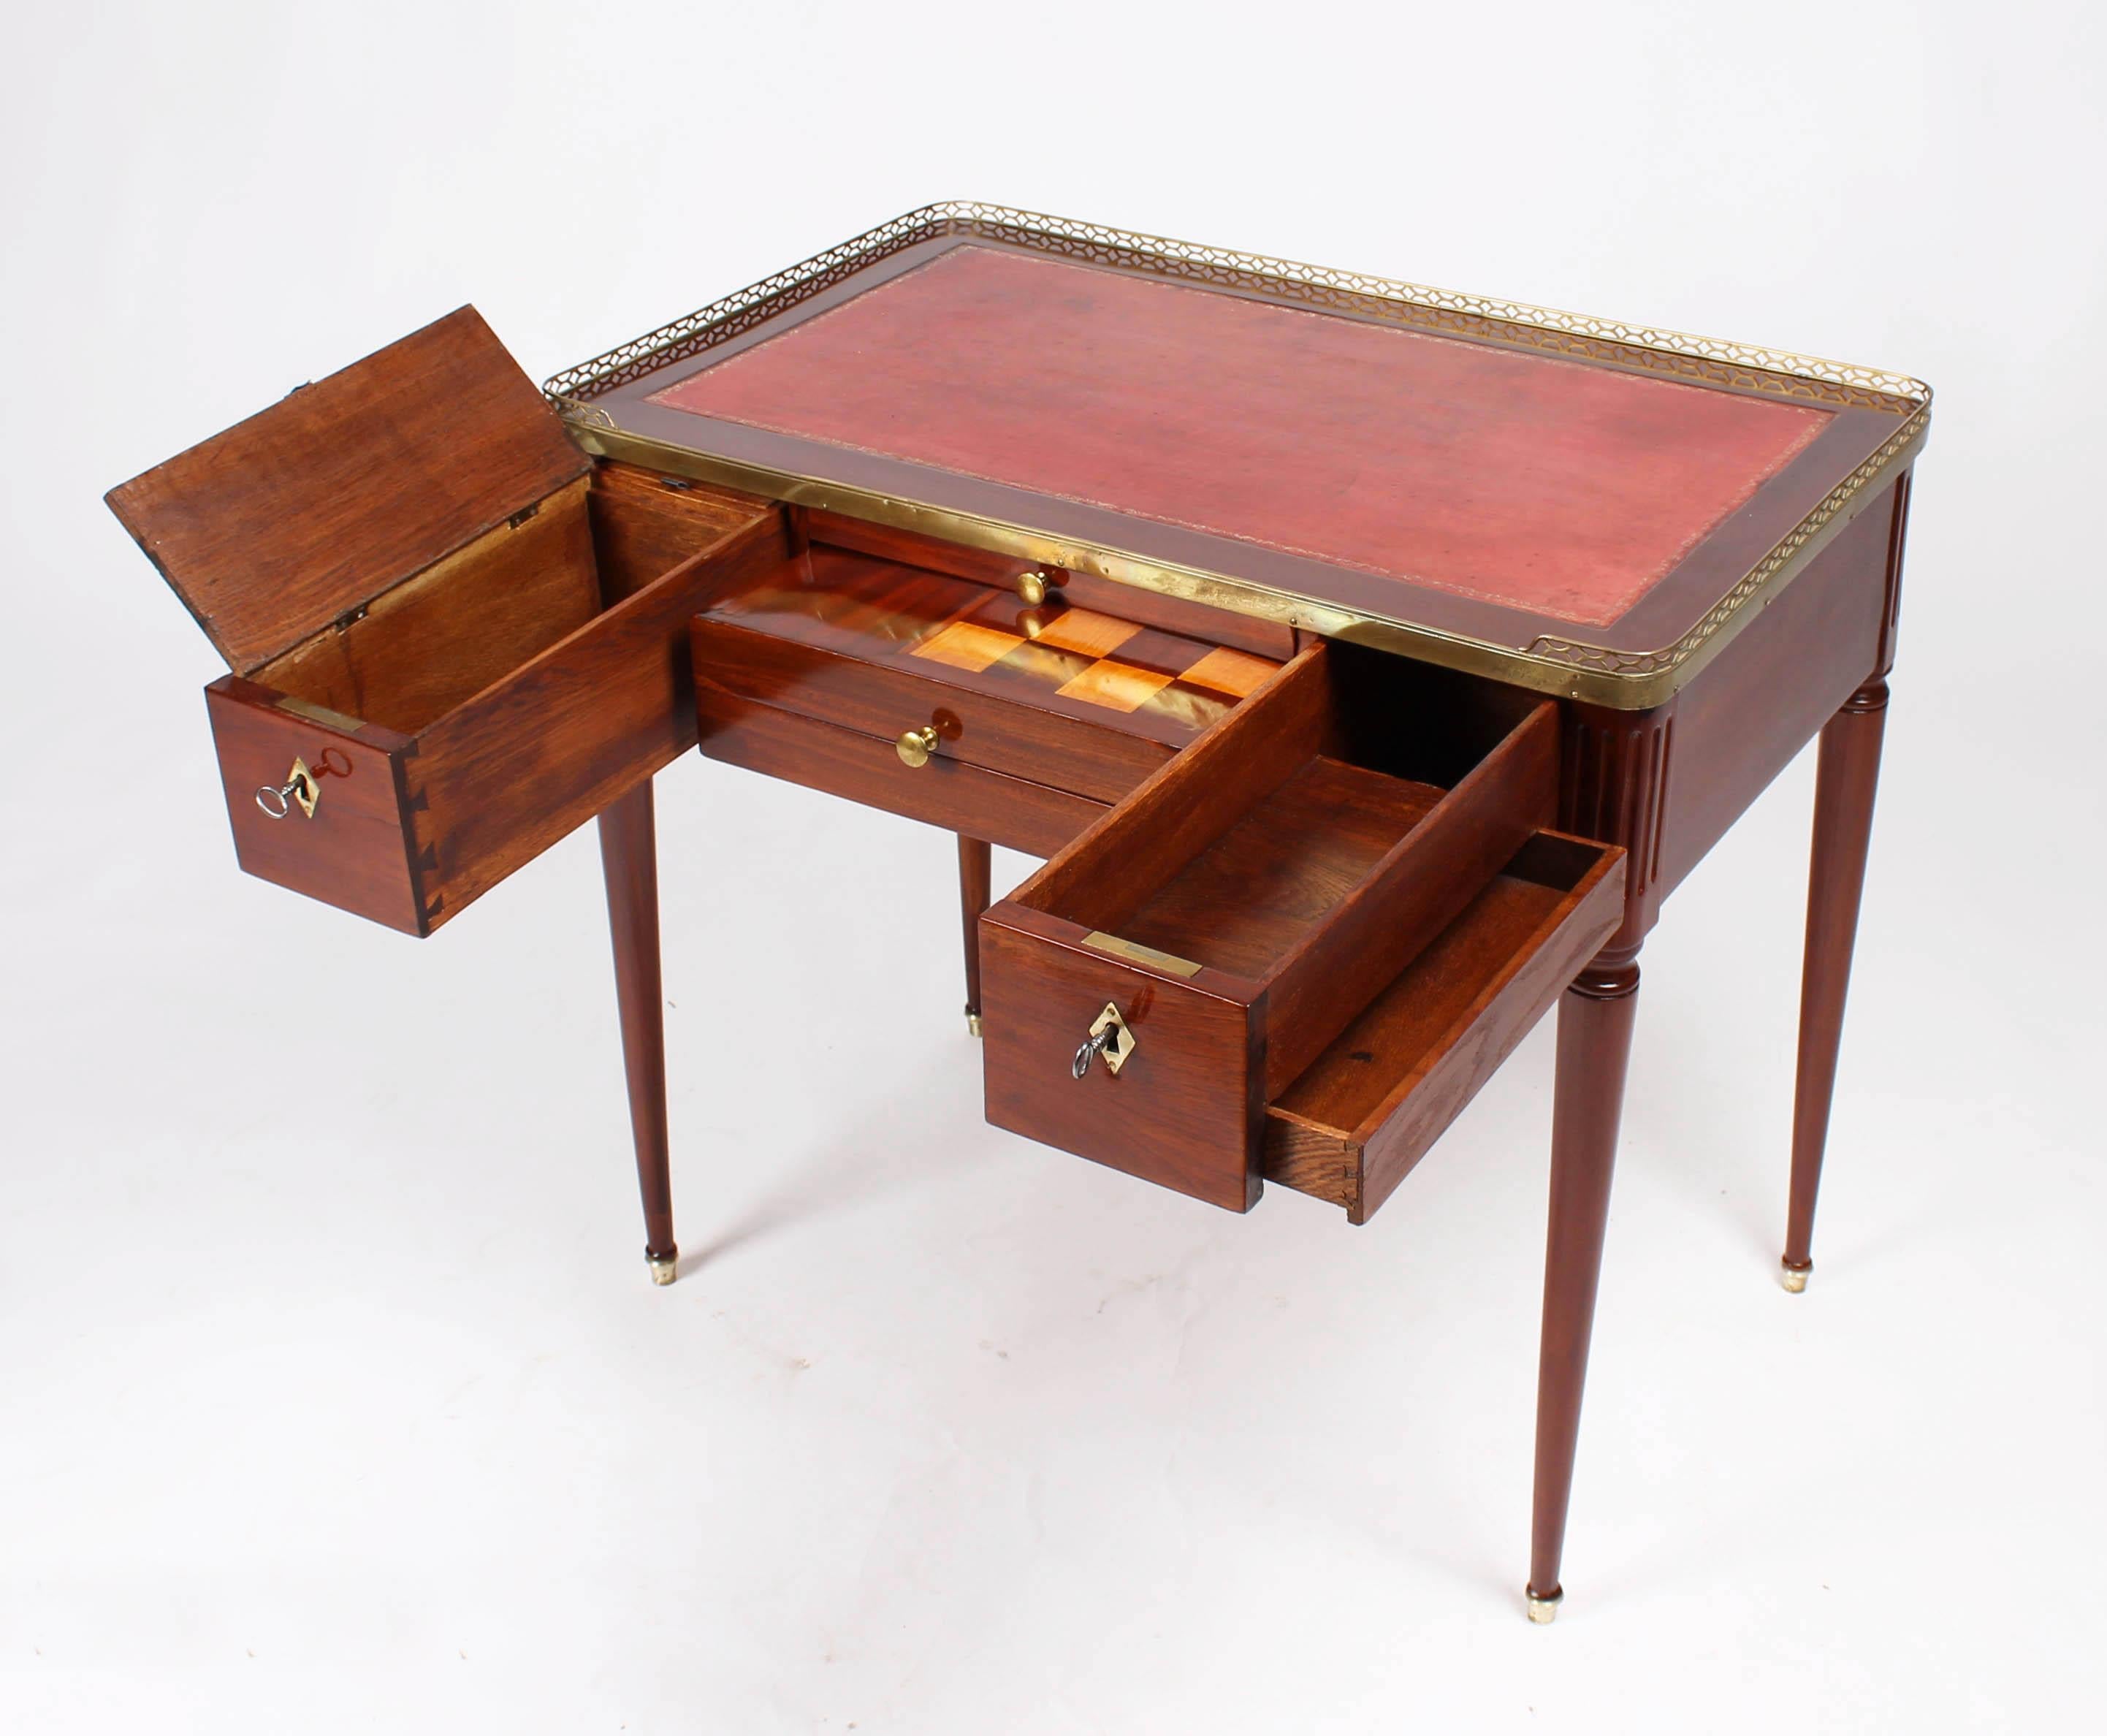 Antique dressing table, play and work table

Western Germany
Mahogany
Classicism circa 1810

Dimensions: H x W x D: 77 x 83 x 52 cm

Multifunctional 19th century table in mahogany veneered on oak.
Round, conical legs standing in brass